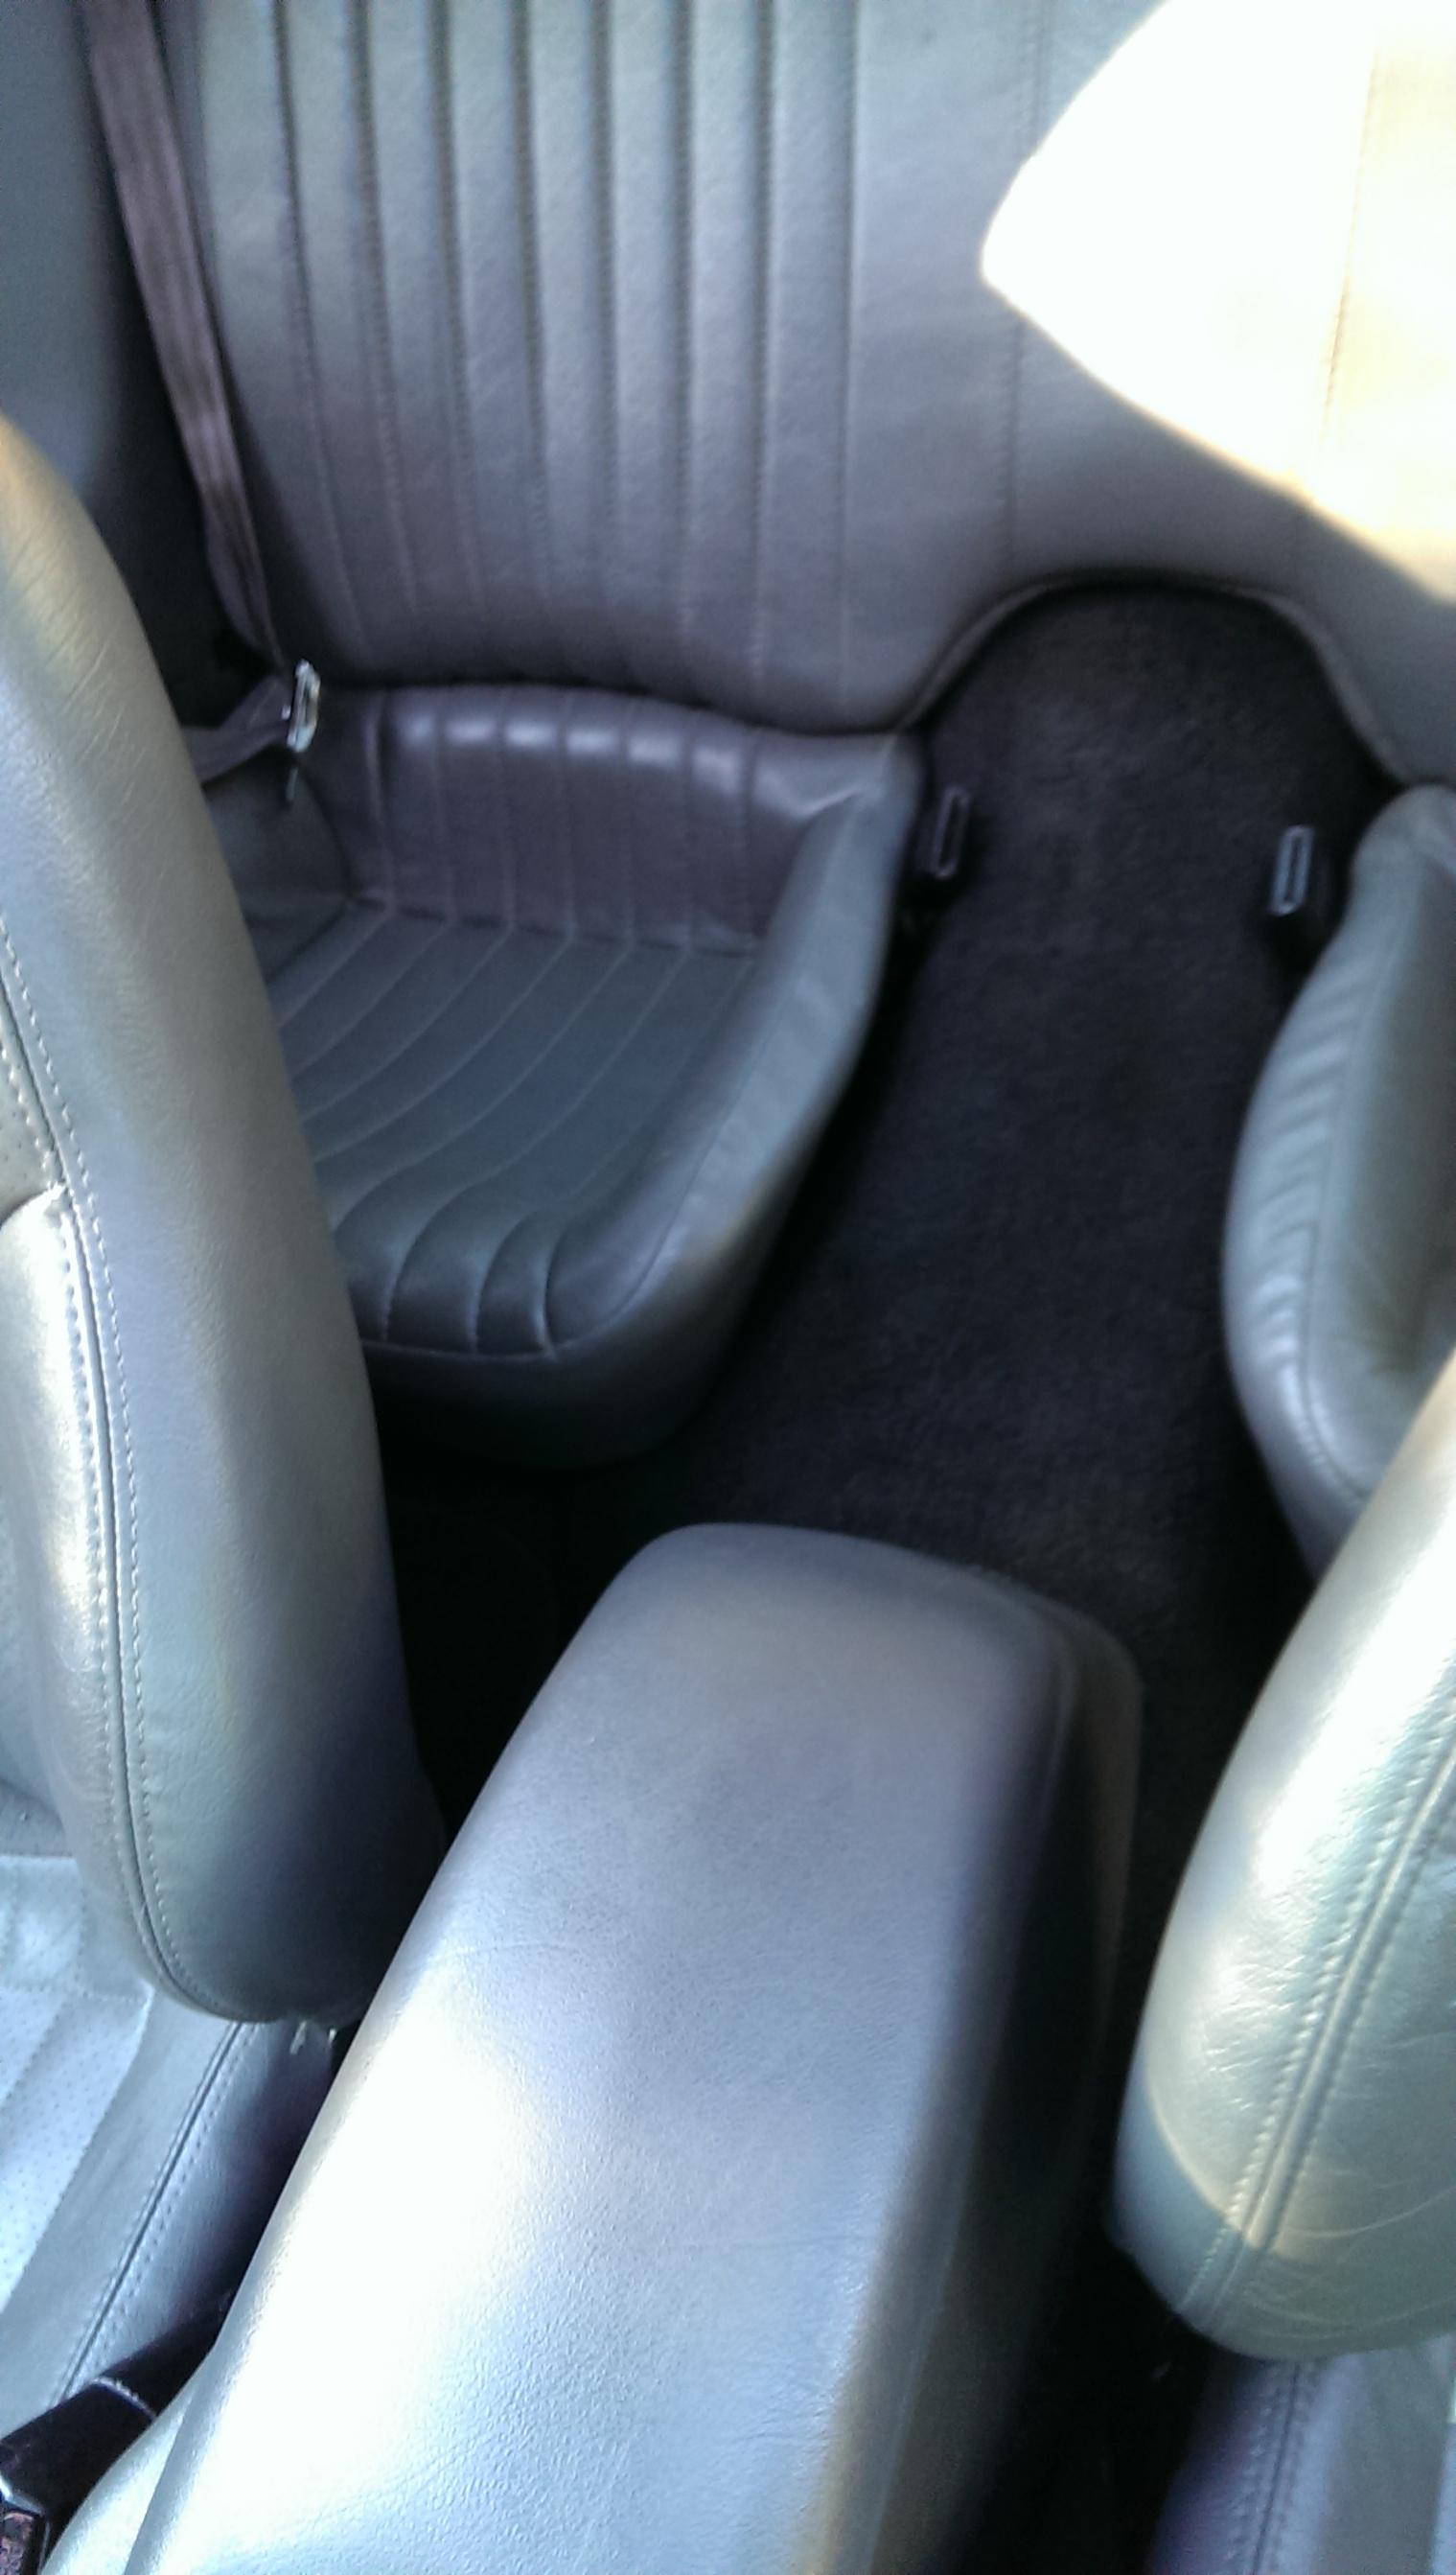 Trans am Carpet Dye with Dupli Color Vinyl carpet paint Gloss Black Before  and After - LS1TECH - Camaro and Firebird Forum Discussion